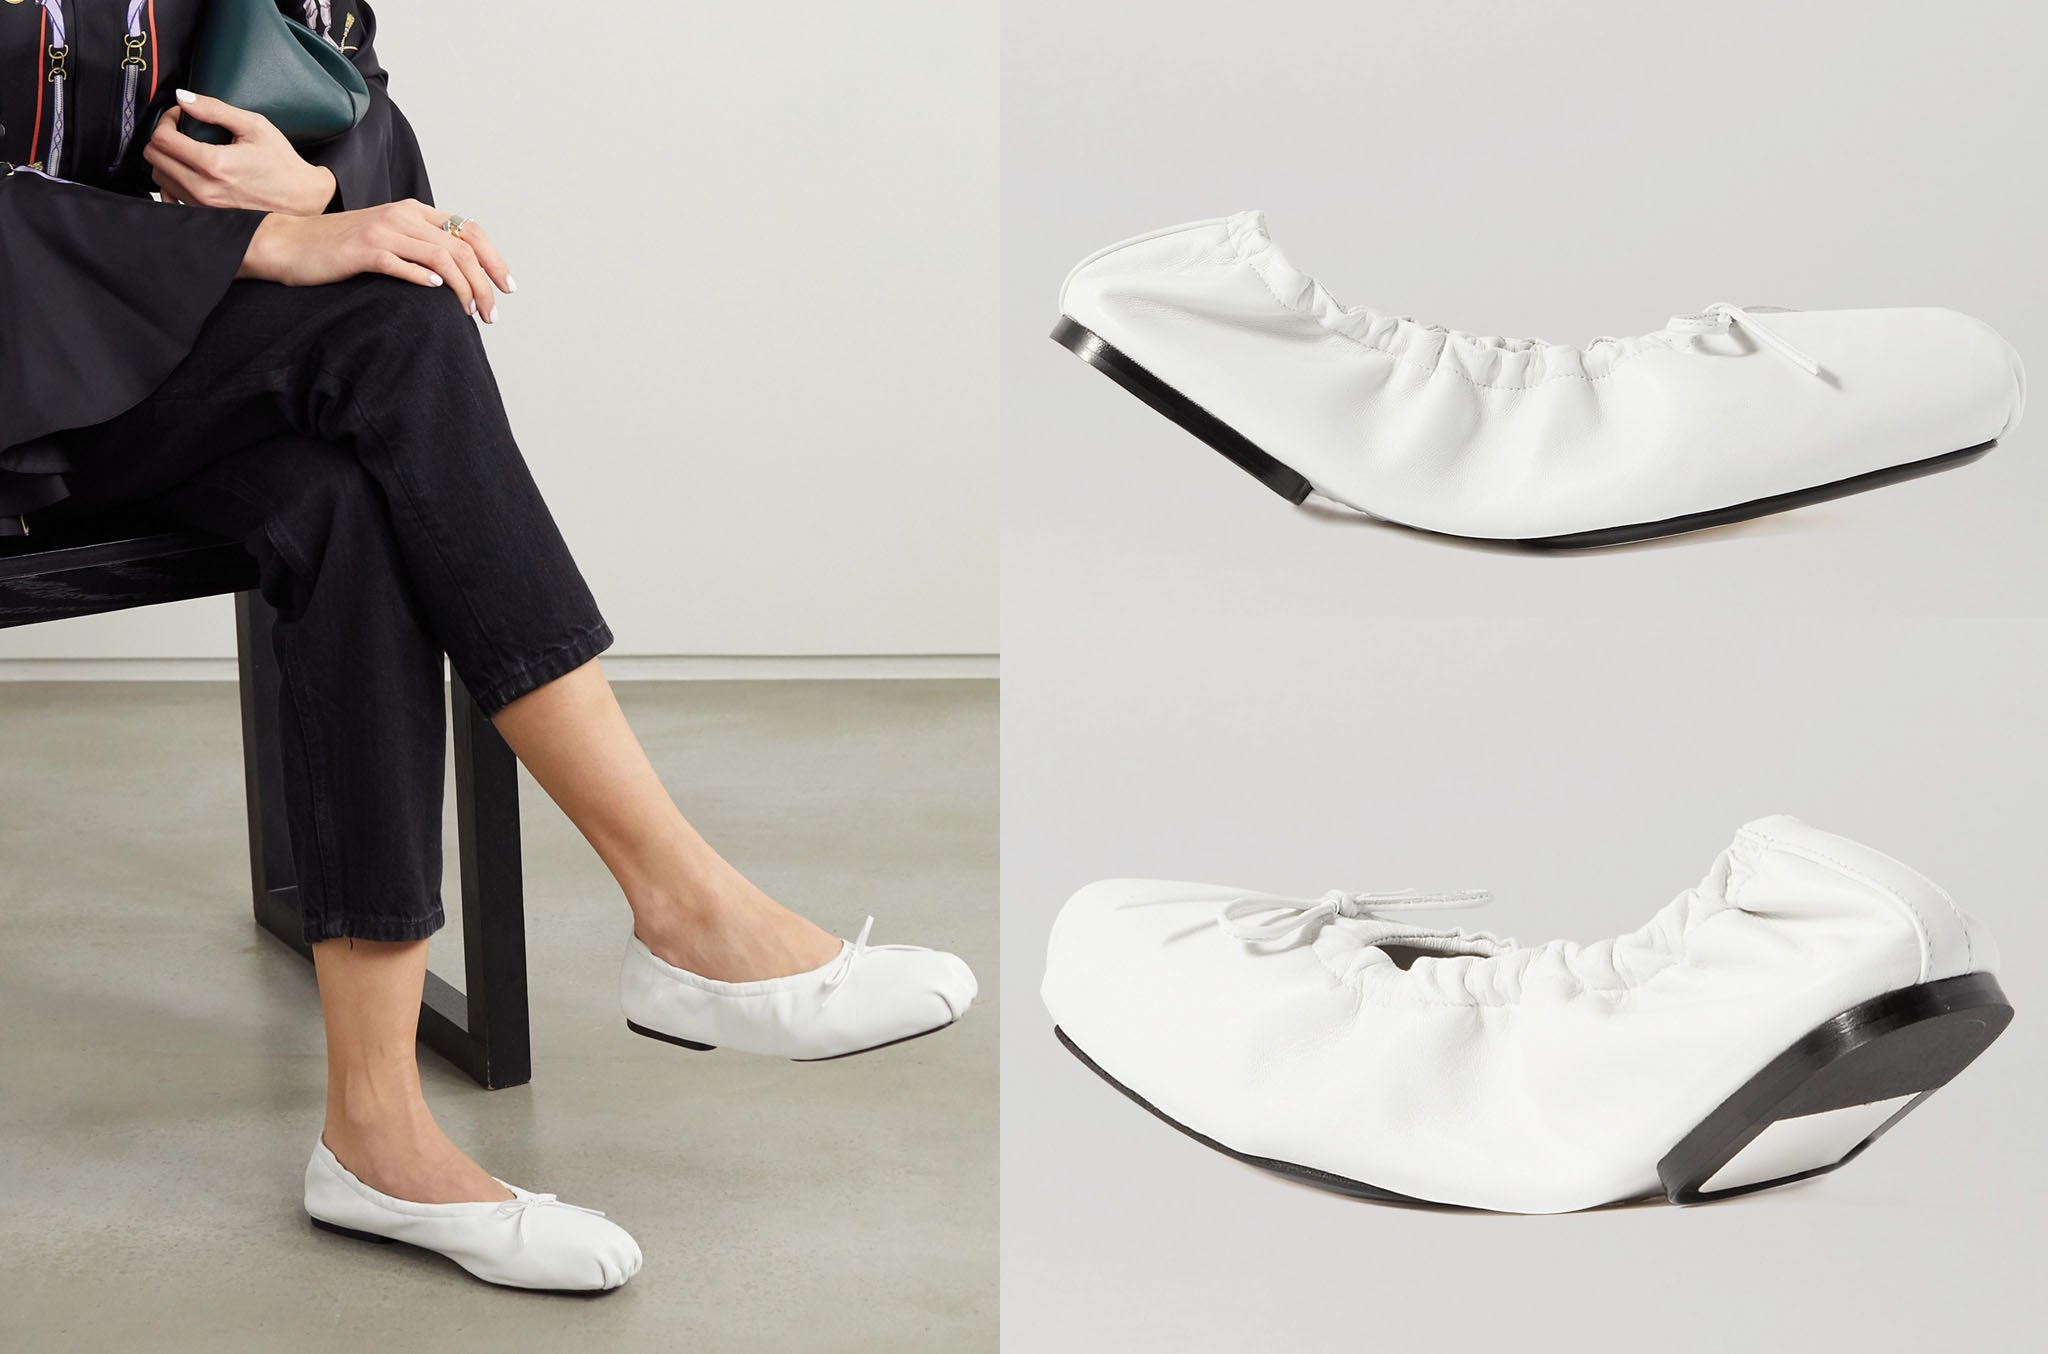 Comfy and versatile, Khaite's Ashland ballet flats are made from smooth white leather that gets even softer over time and features square toes inspired by pointe styles and a dainty bow for a feminine touch